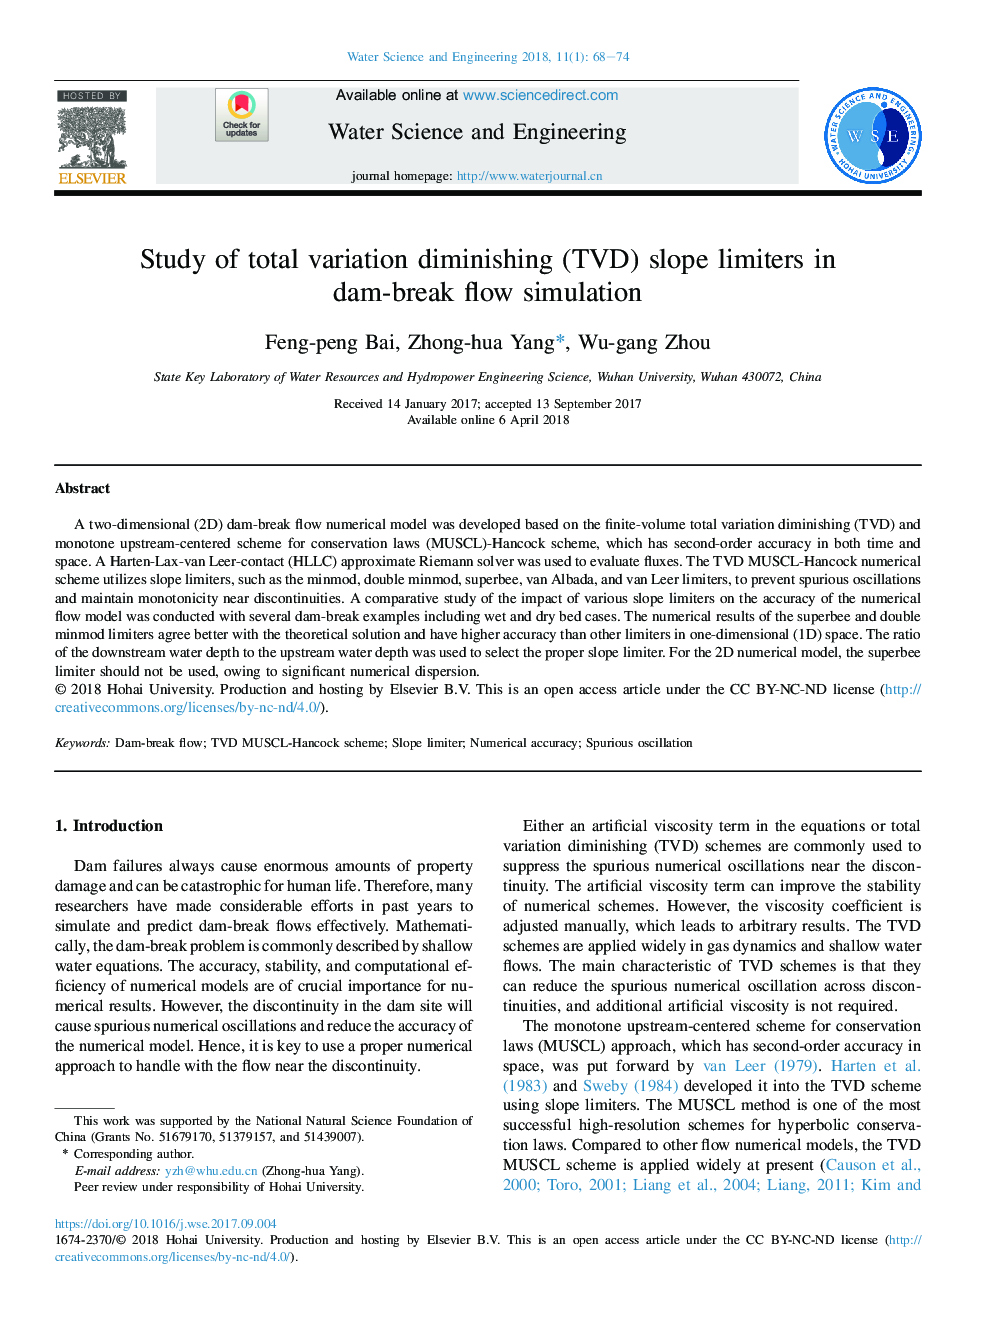 Study of total variation diminishing (TVD) slope limiters in dam-breakÂ flowÂ simulation